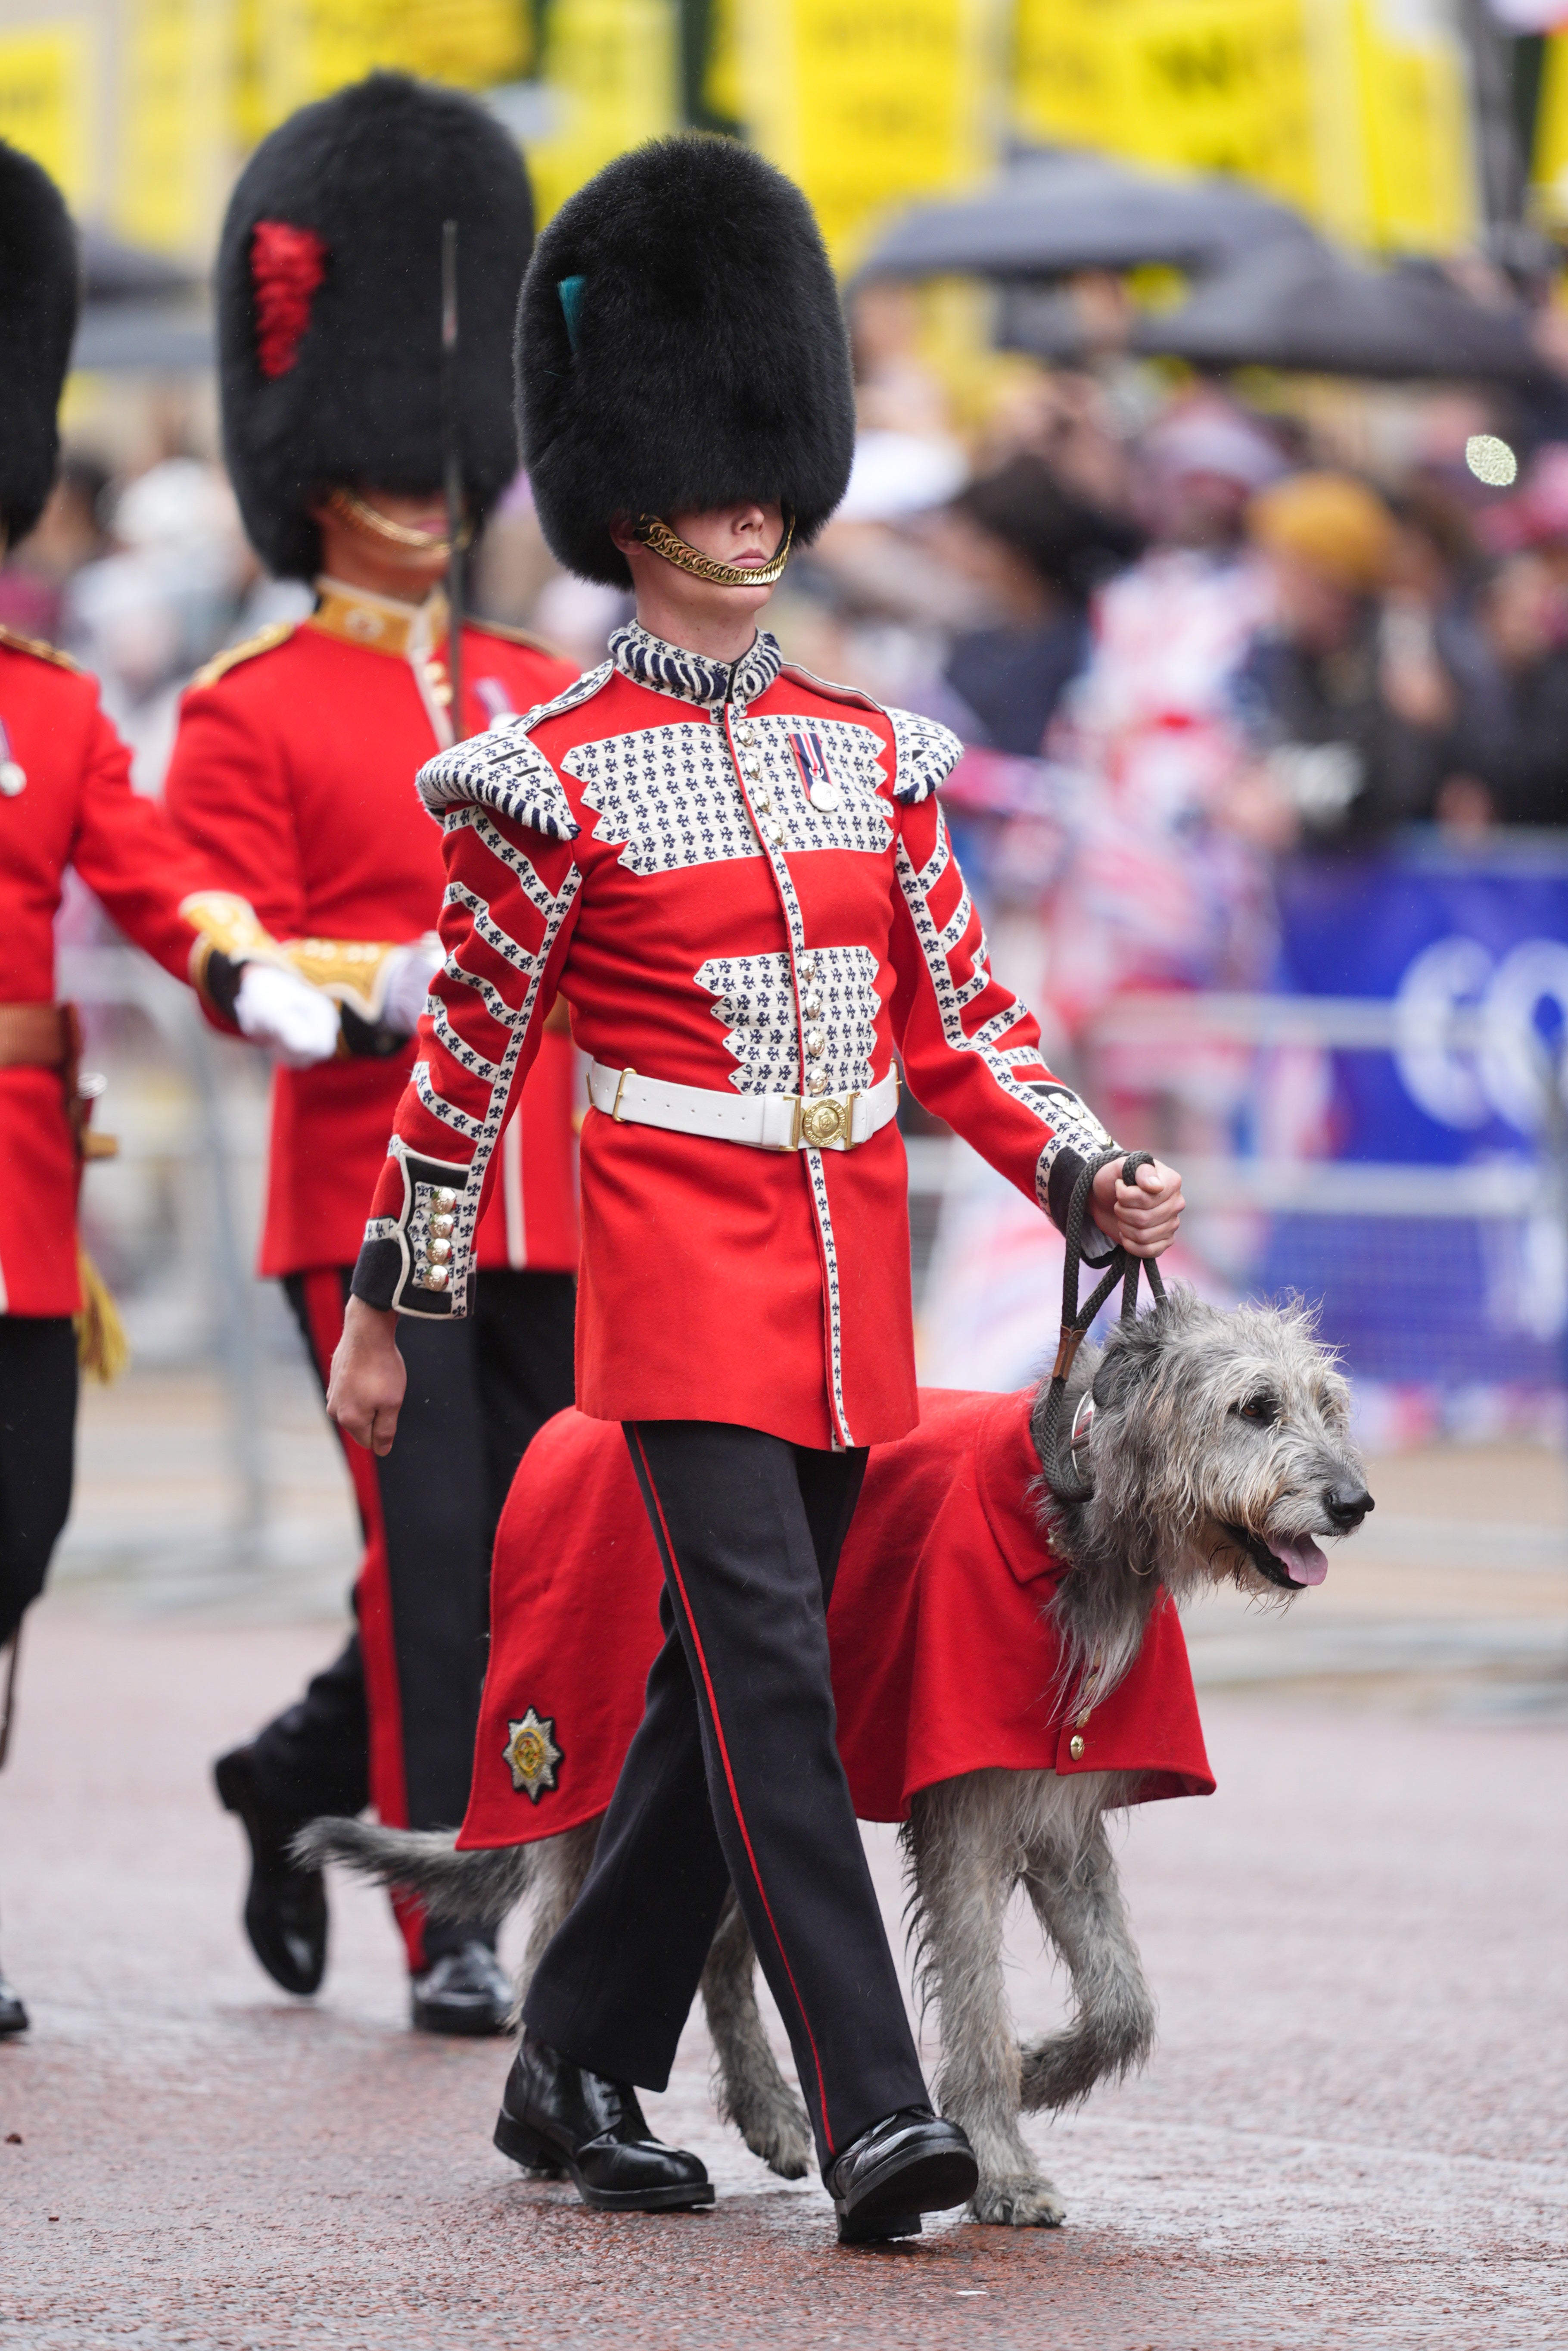 Official mascot of the Irish Guard, the wolfhound Seamus has been the event's mascot for three years